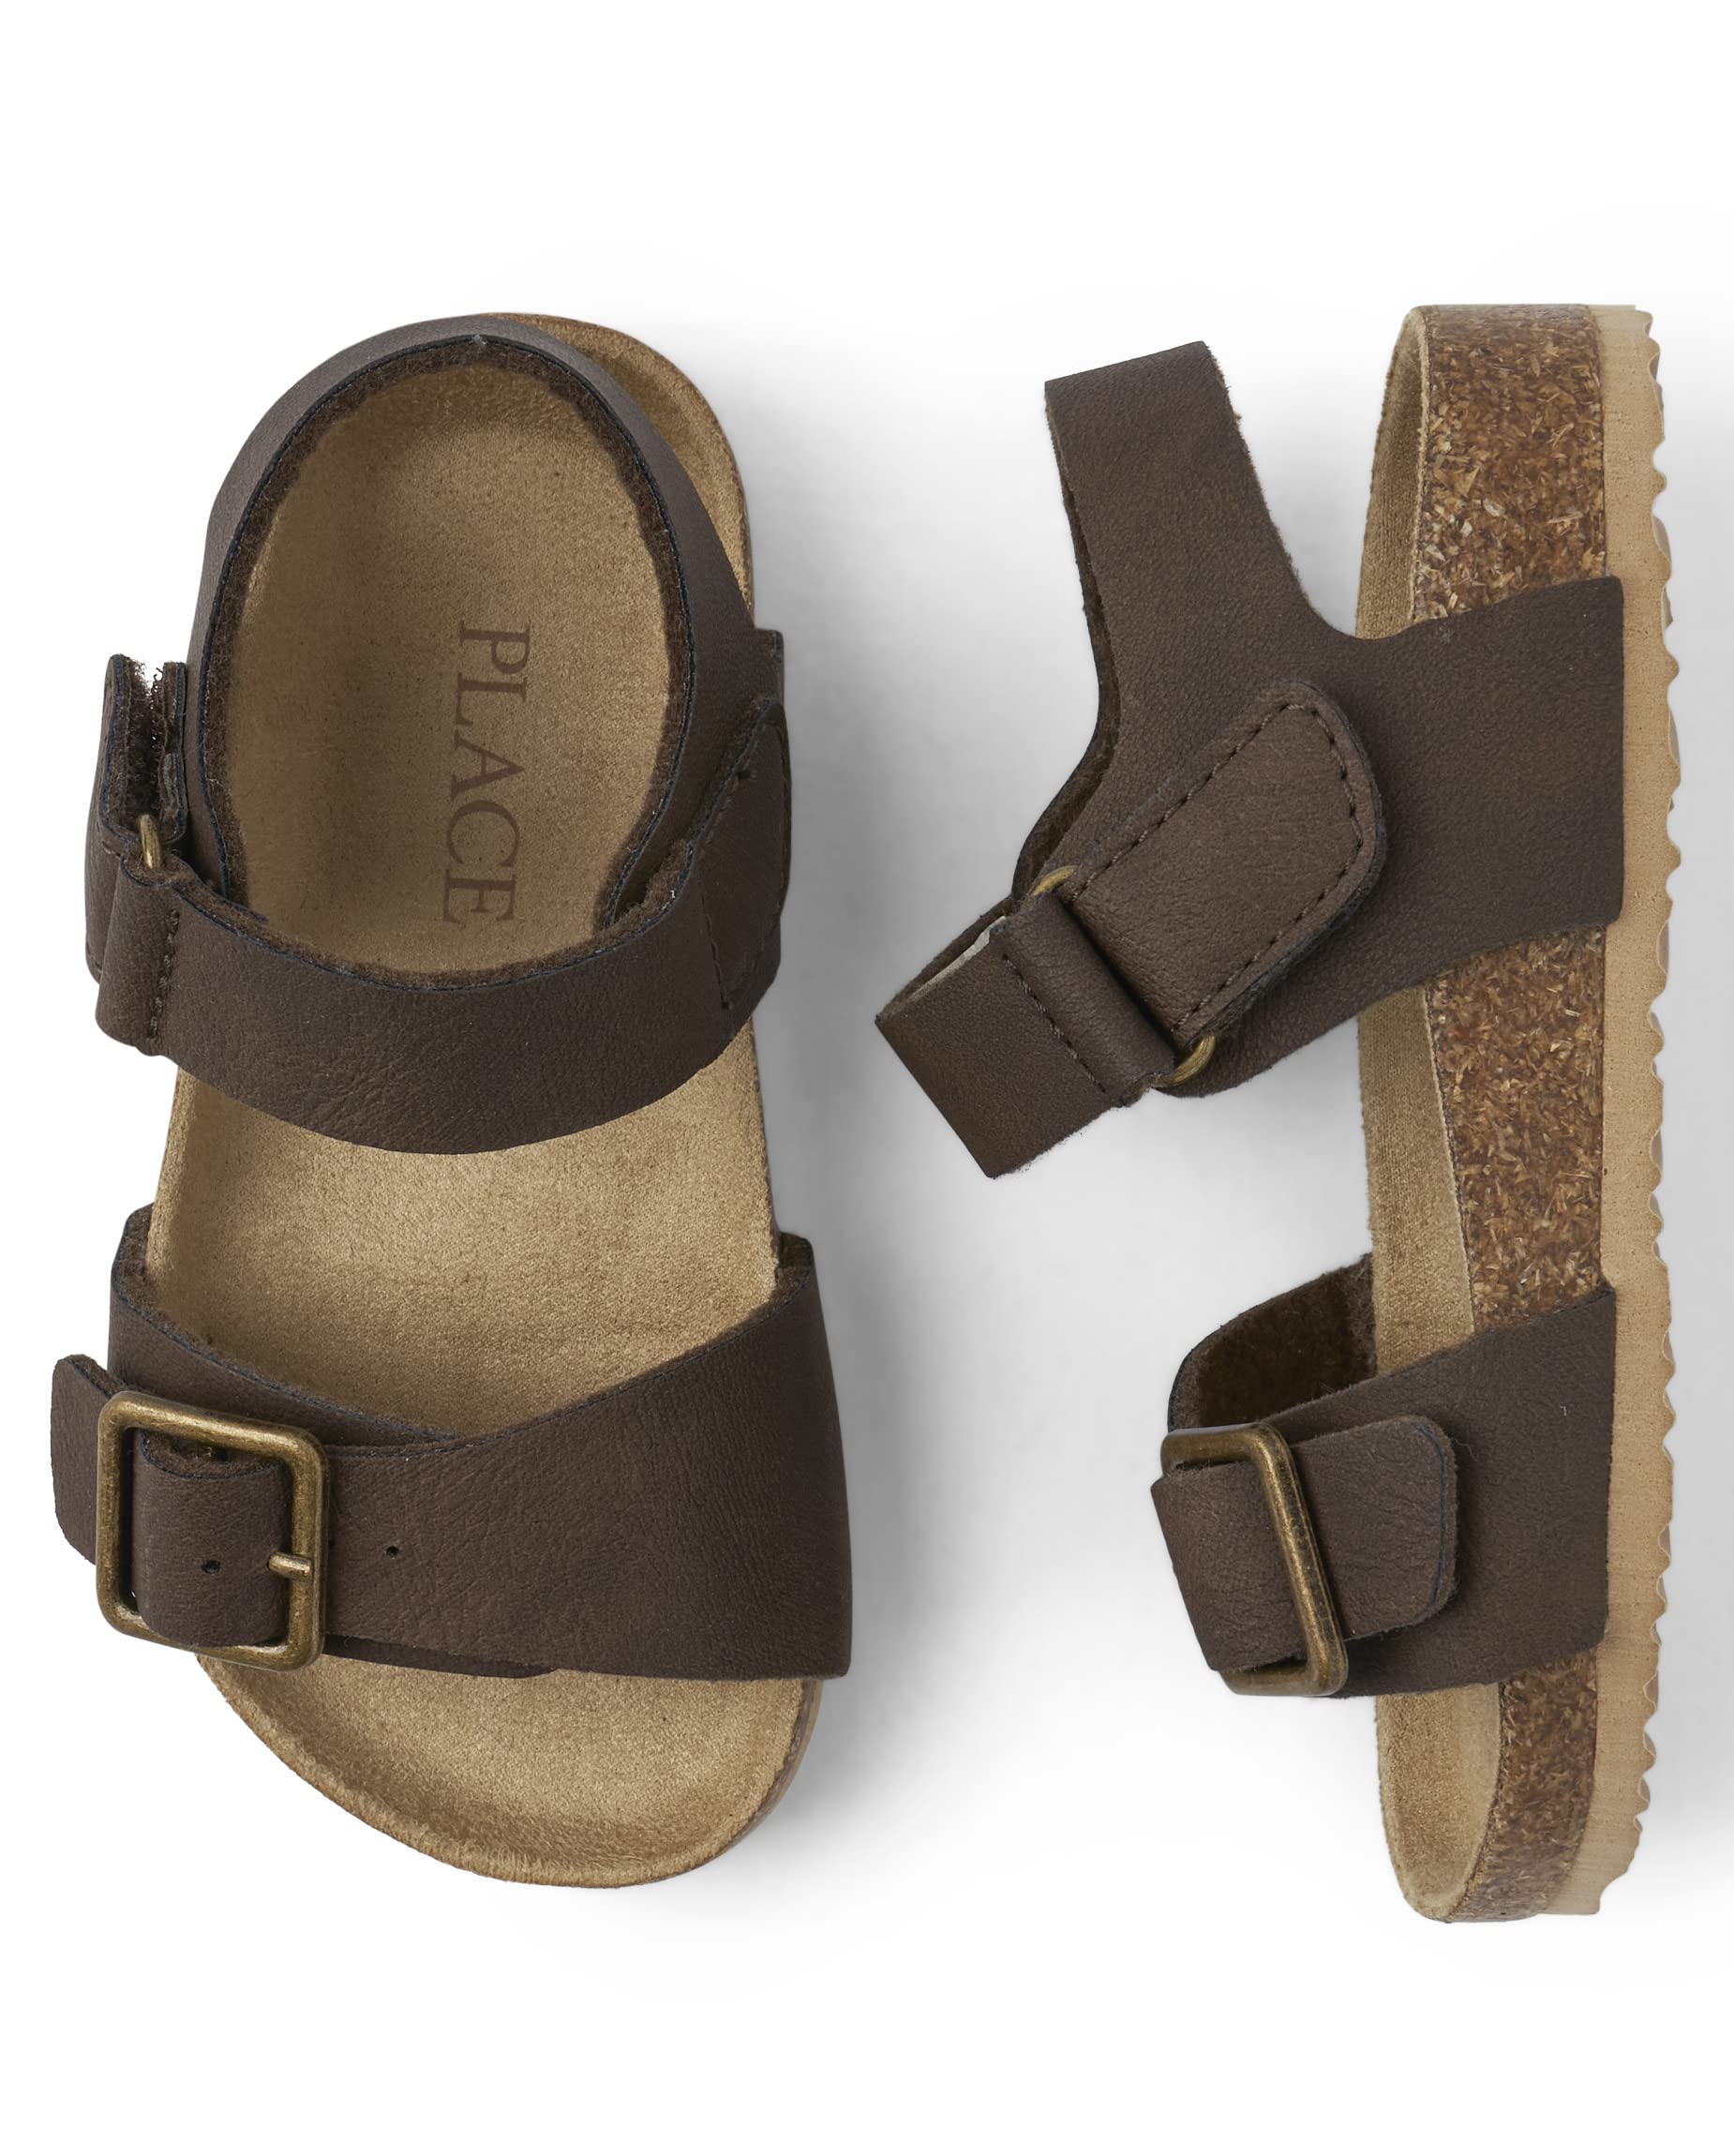 The Children's Place Unisex-Child and Toddler Boys Buckle Sandals Slide